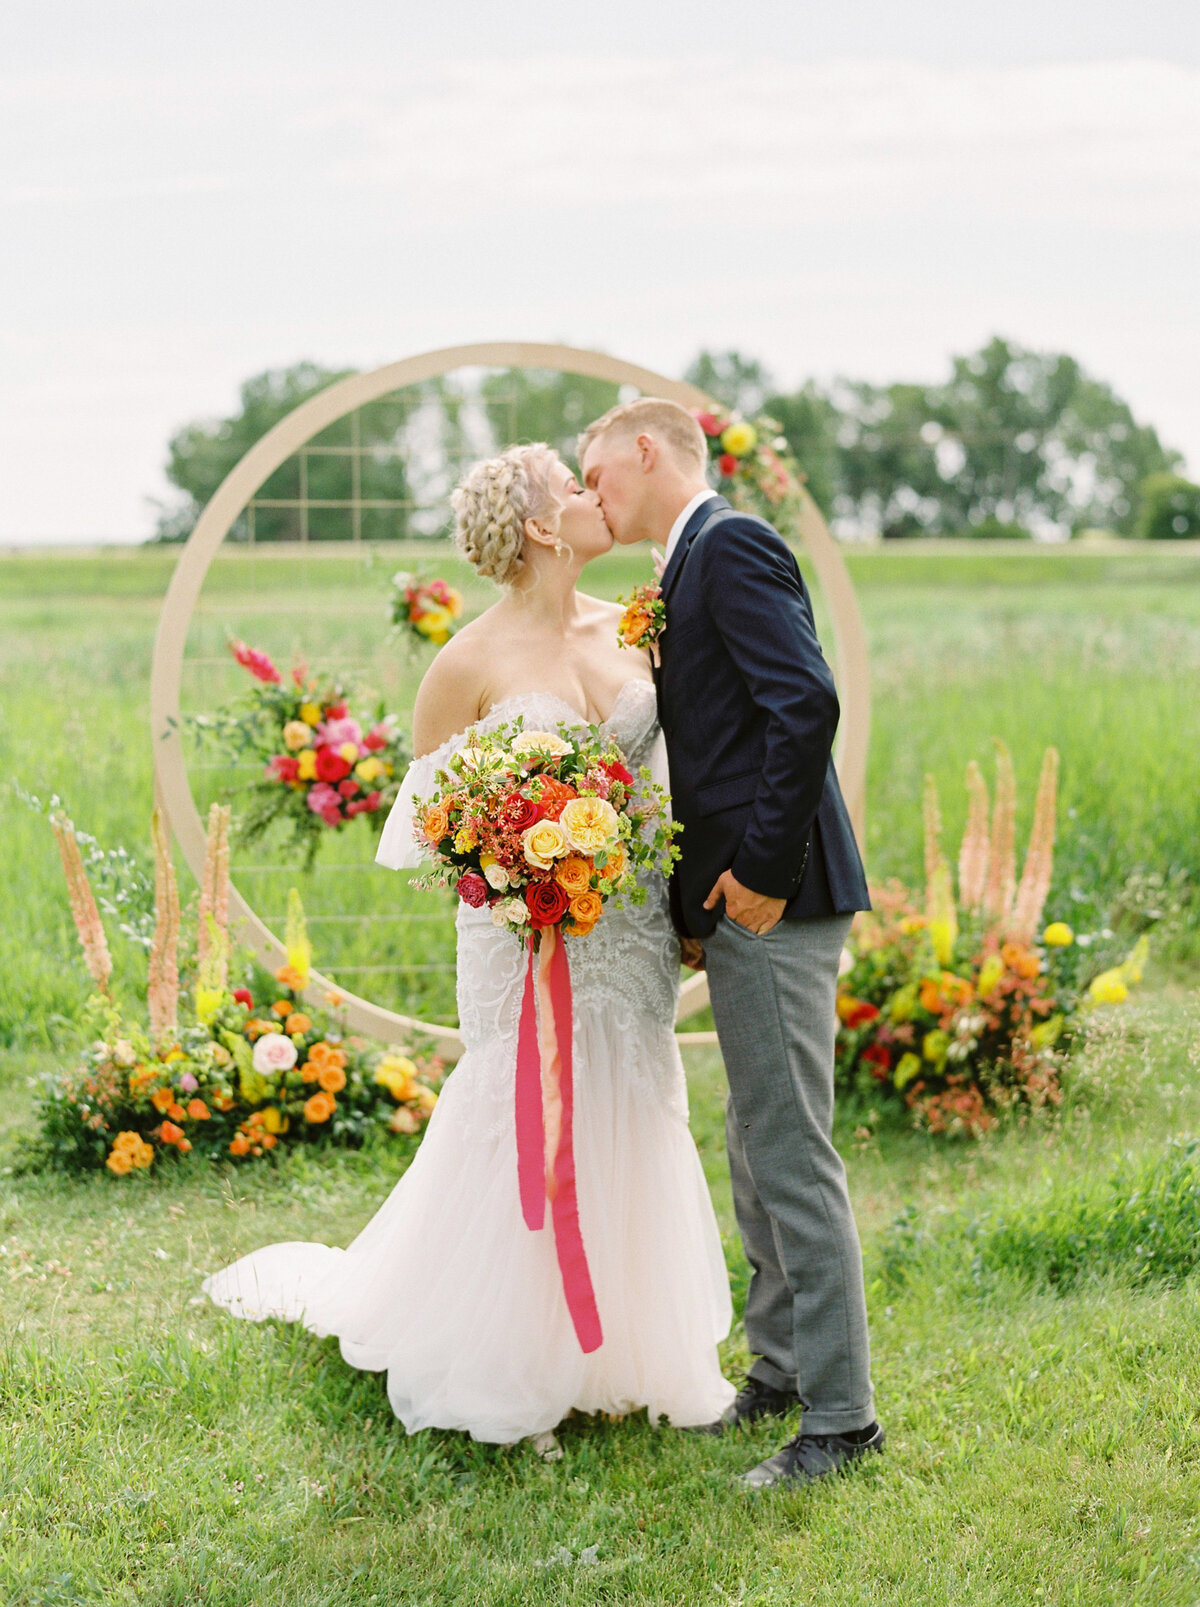 Couple kissing at their stunning and colourful red, orange and yellow outdoor wedding ceremony  at The Gathered, a nostalgic greenhouse based in Kathryn, Alberta wedding venue, featured on the Brontë Bride Vendor Guide.